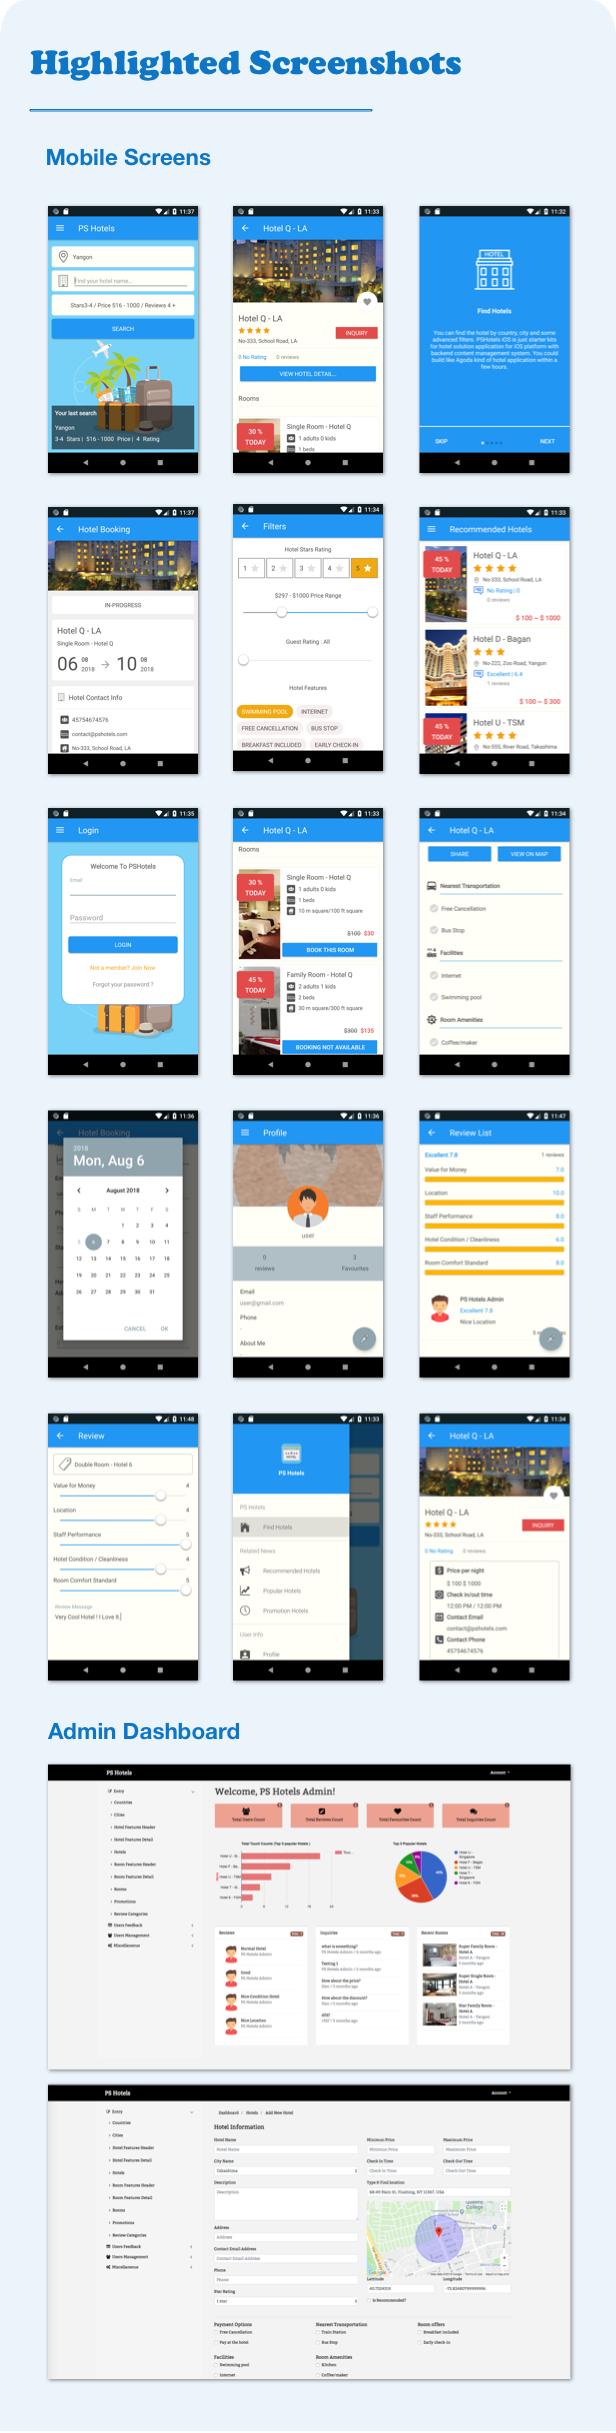 Hotels Android App With Material Design & PHP Backend (V1.8) - 8